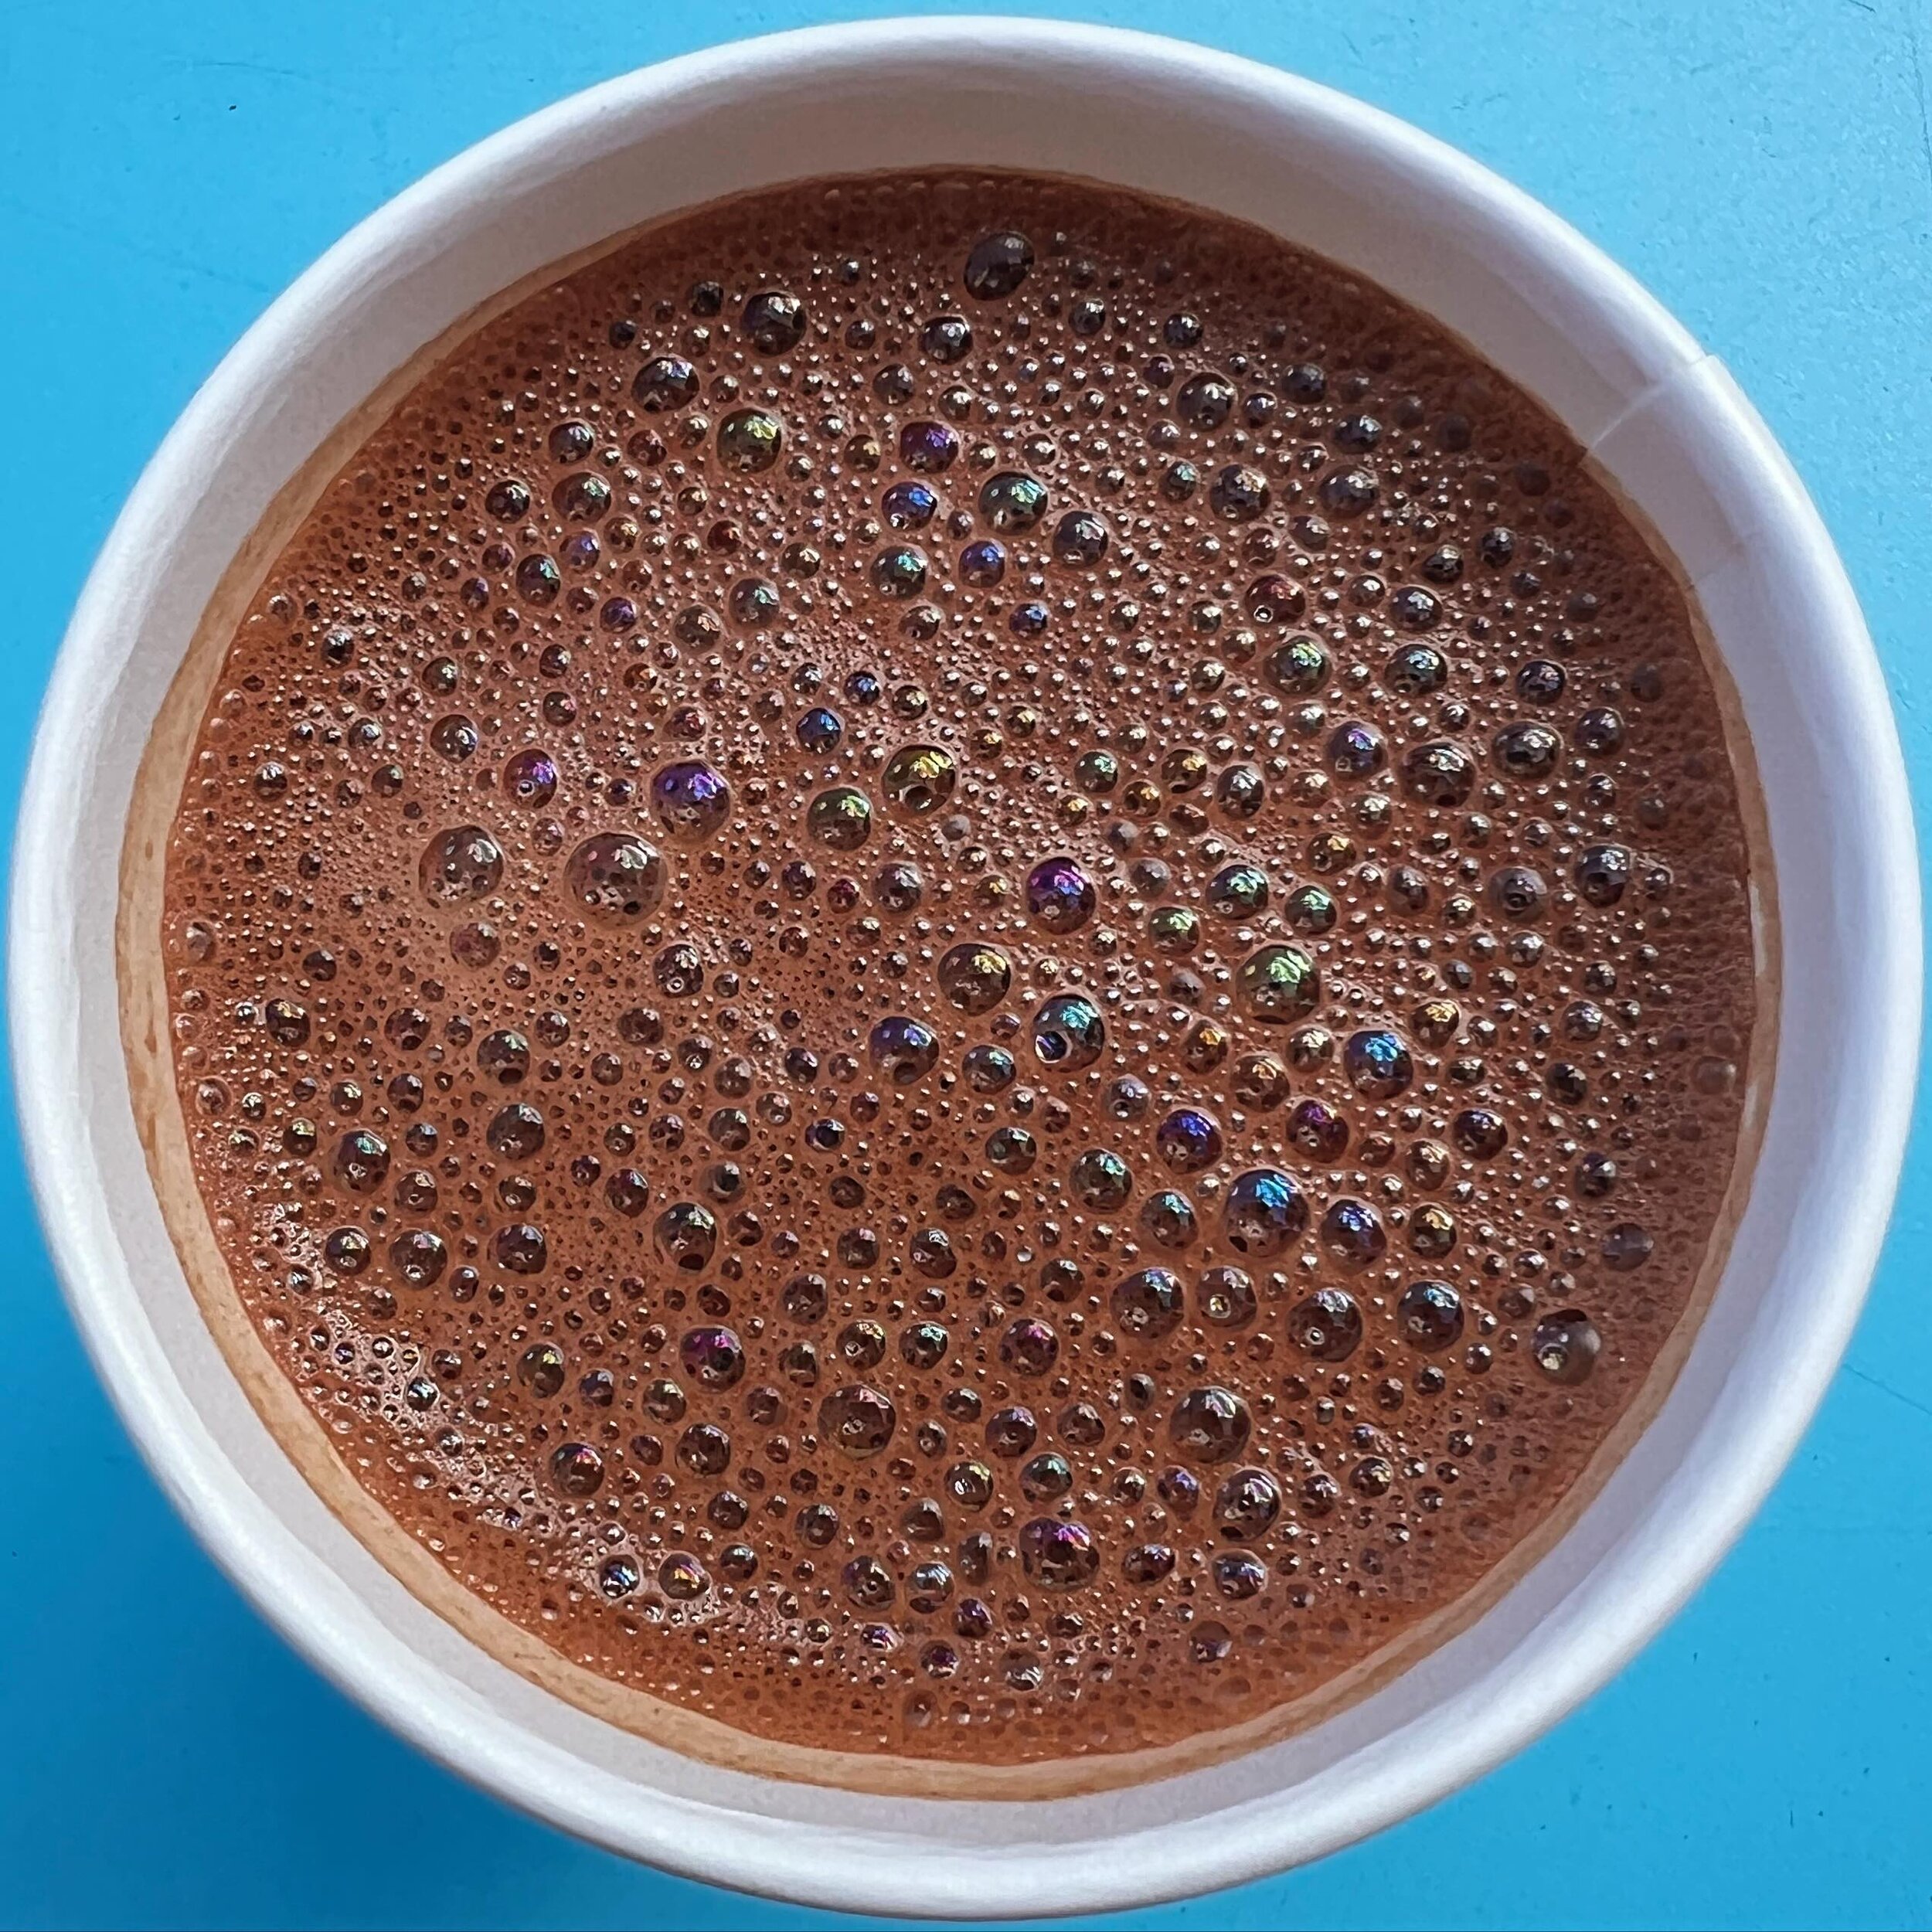 @chocolatedragoncafe thank you for the super tasty, dairy-free, iridescent hot chocolate! those bubbles are like precious jewels of pure delight. what a treasure of a treat!

#oakland #chocolate #dragon #magic #treasure